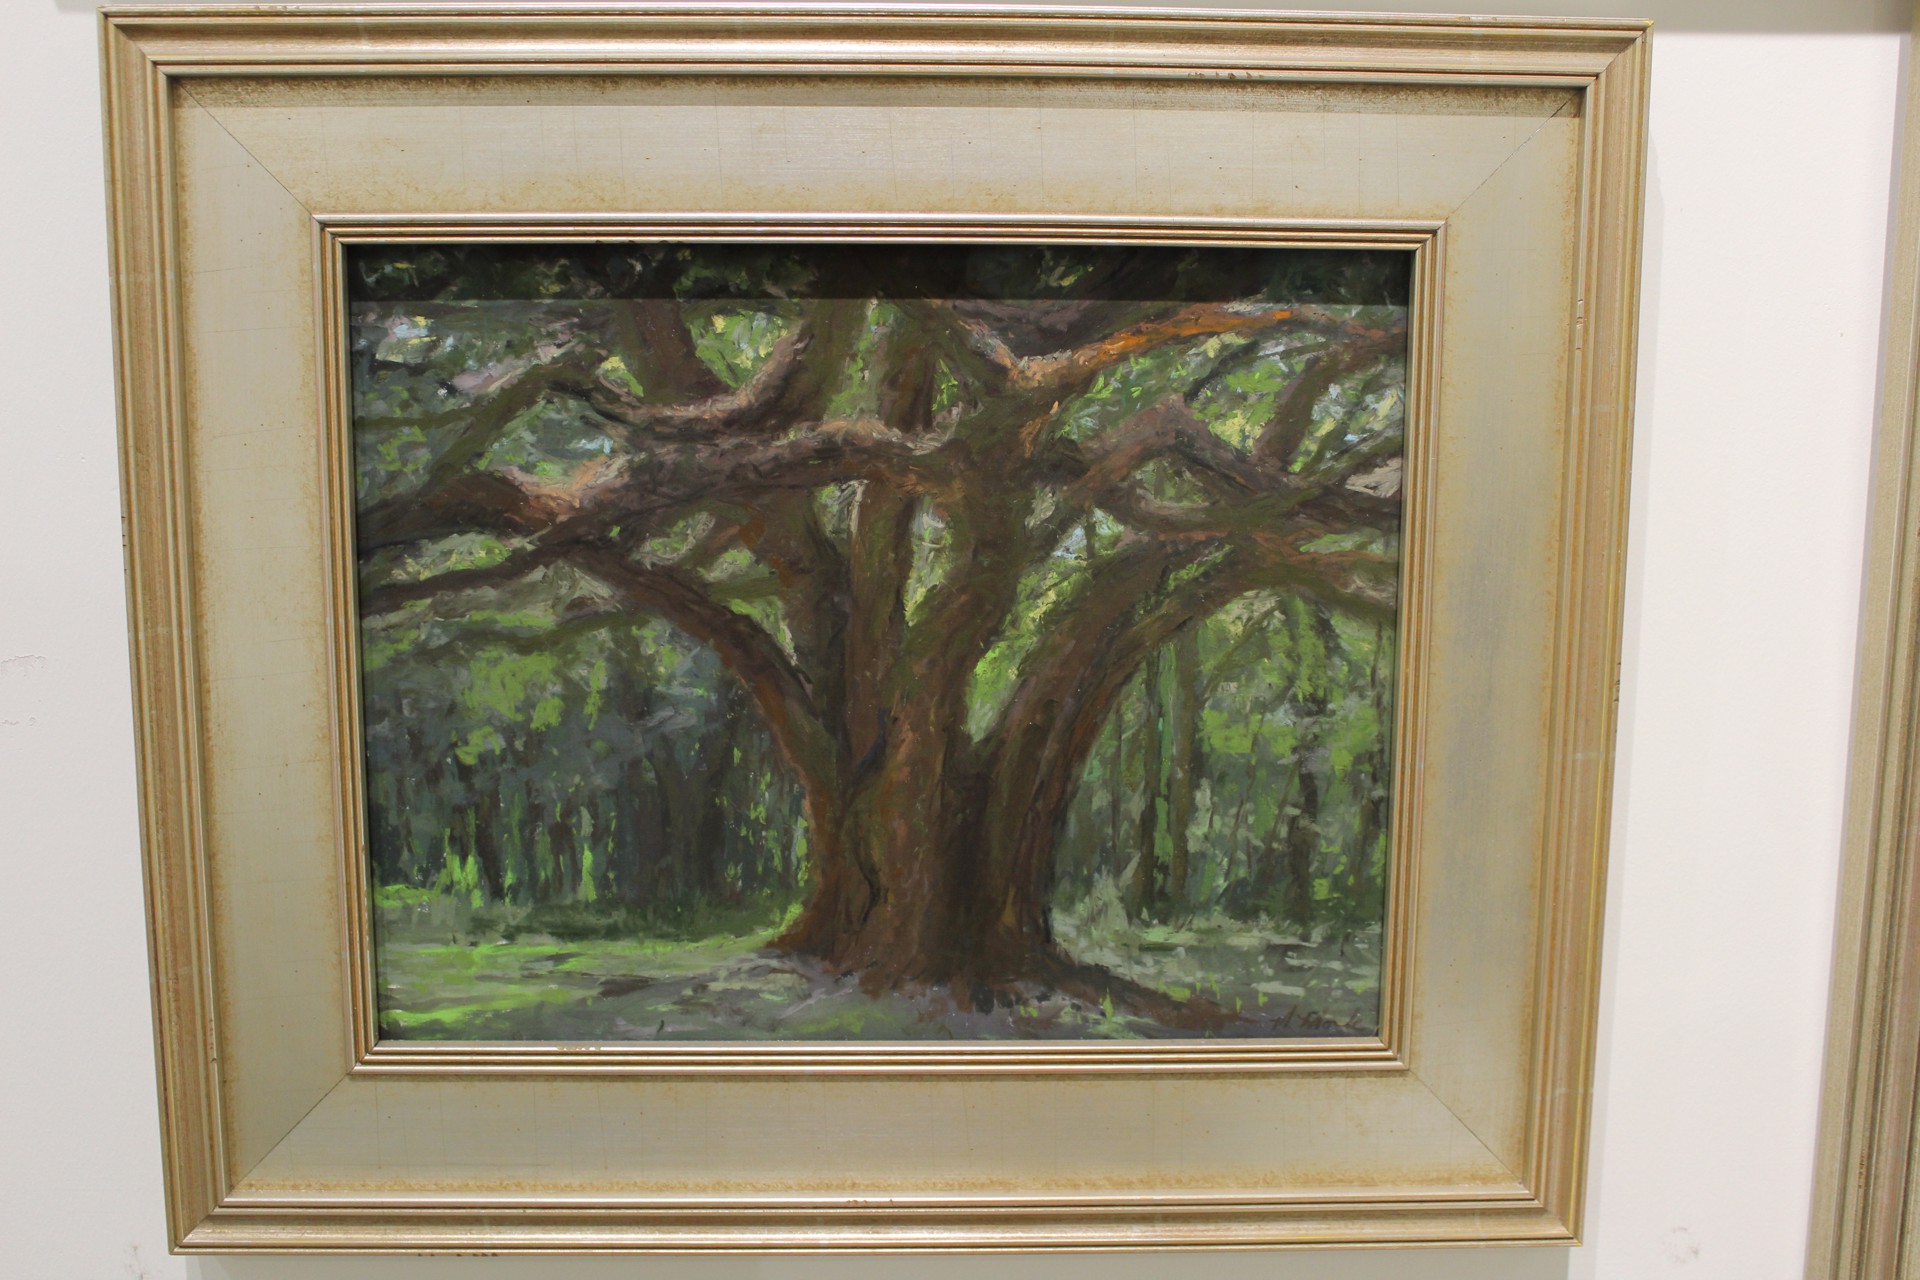 Oak Tree in the Morning Light by Mary Monk